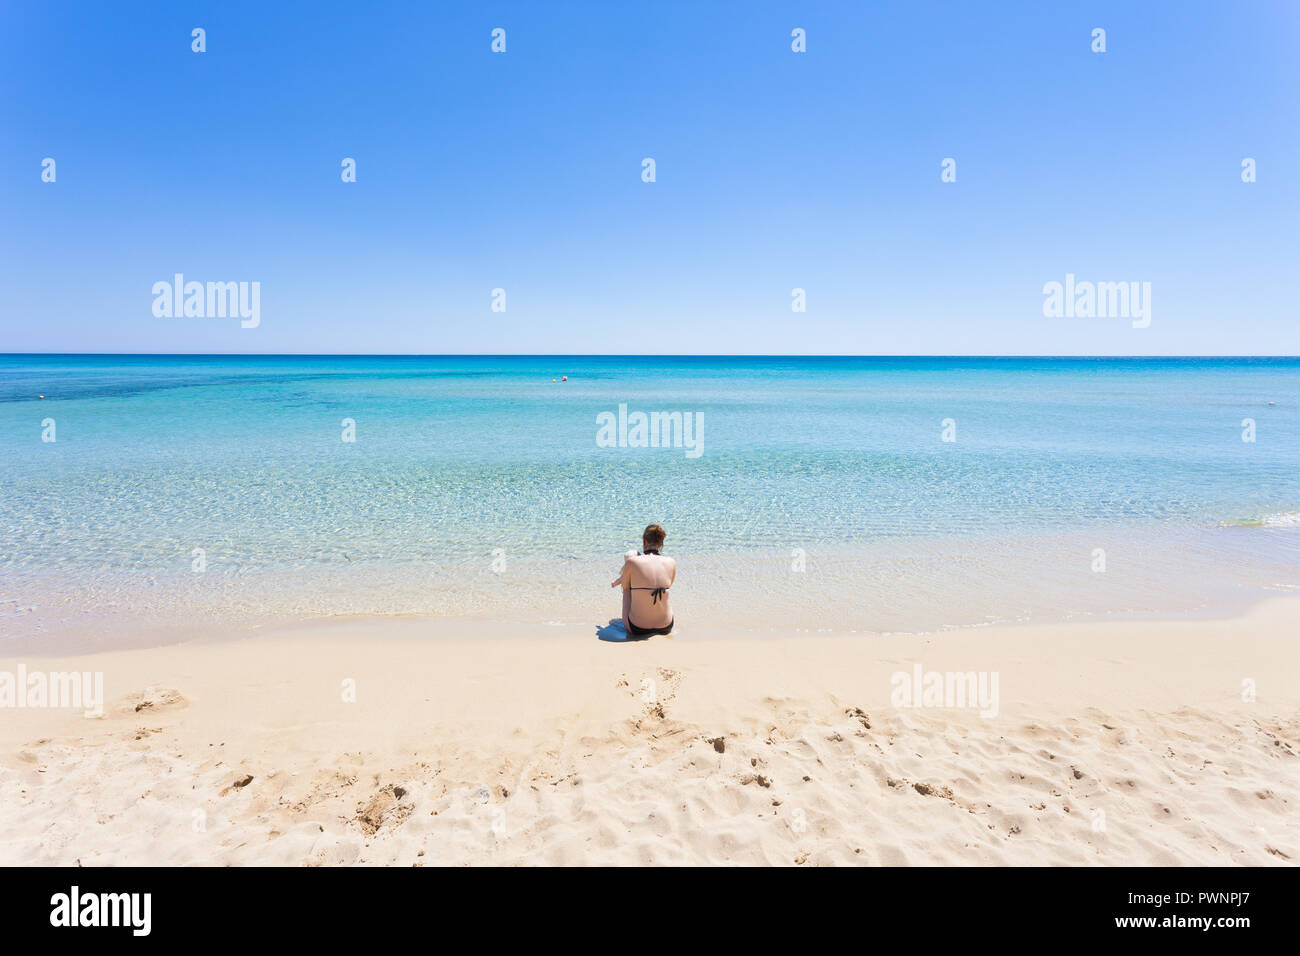 Lido Venere, Apulia, Italy - A young mother sitting on the beach looking towards the horizon Stock Photo